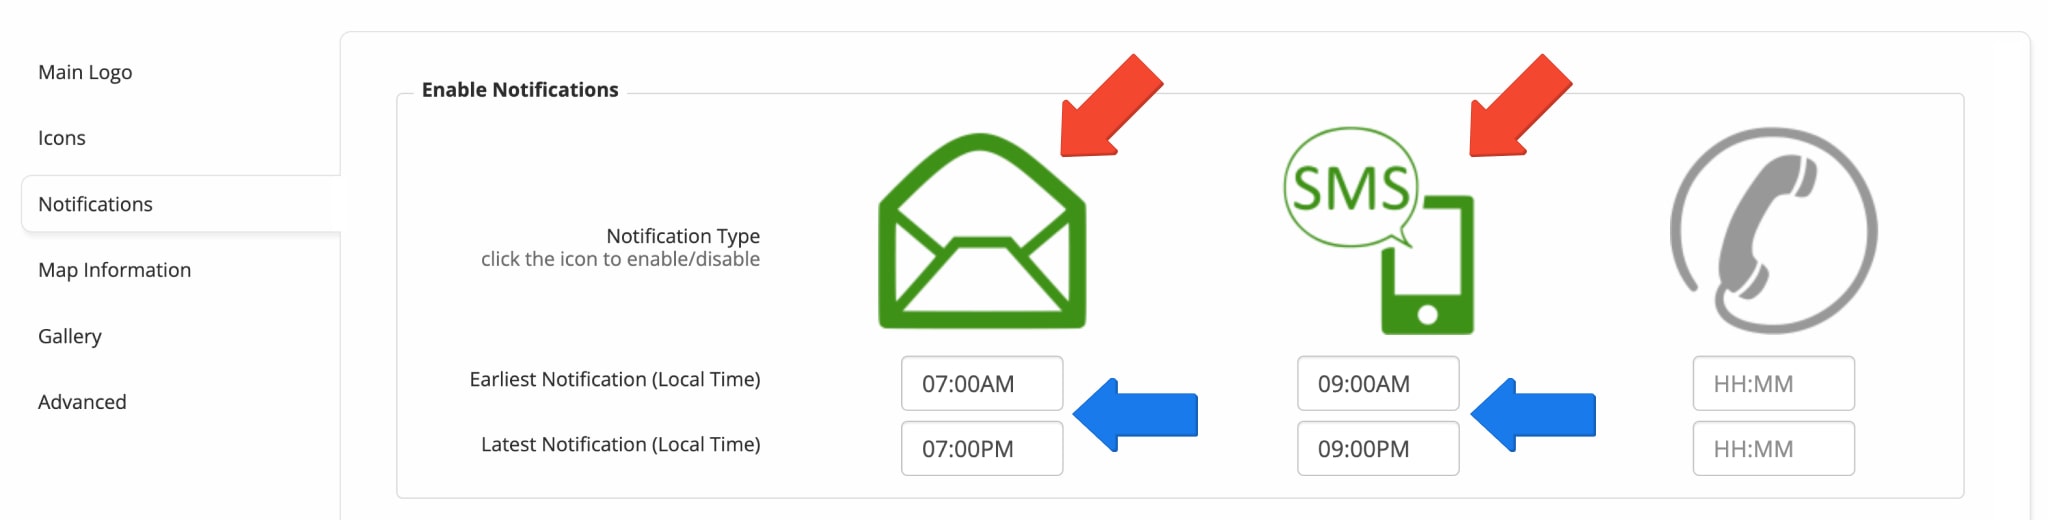 Enable Email and SMS customer notifications by clicking the corresponding icons in the Notification Settings.